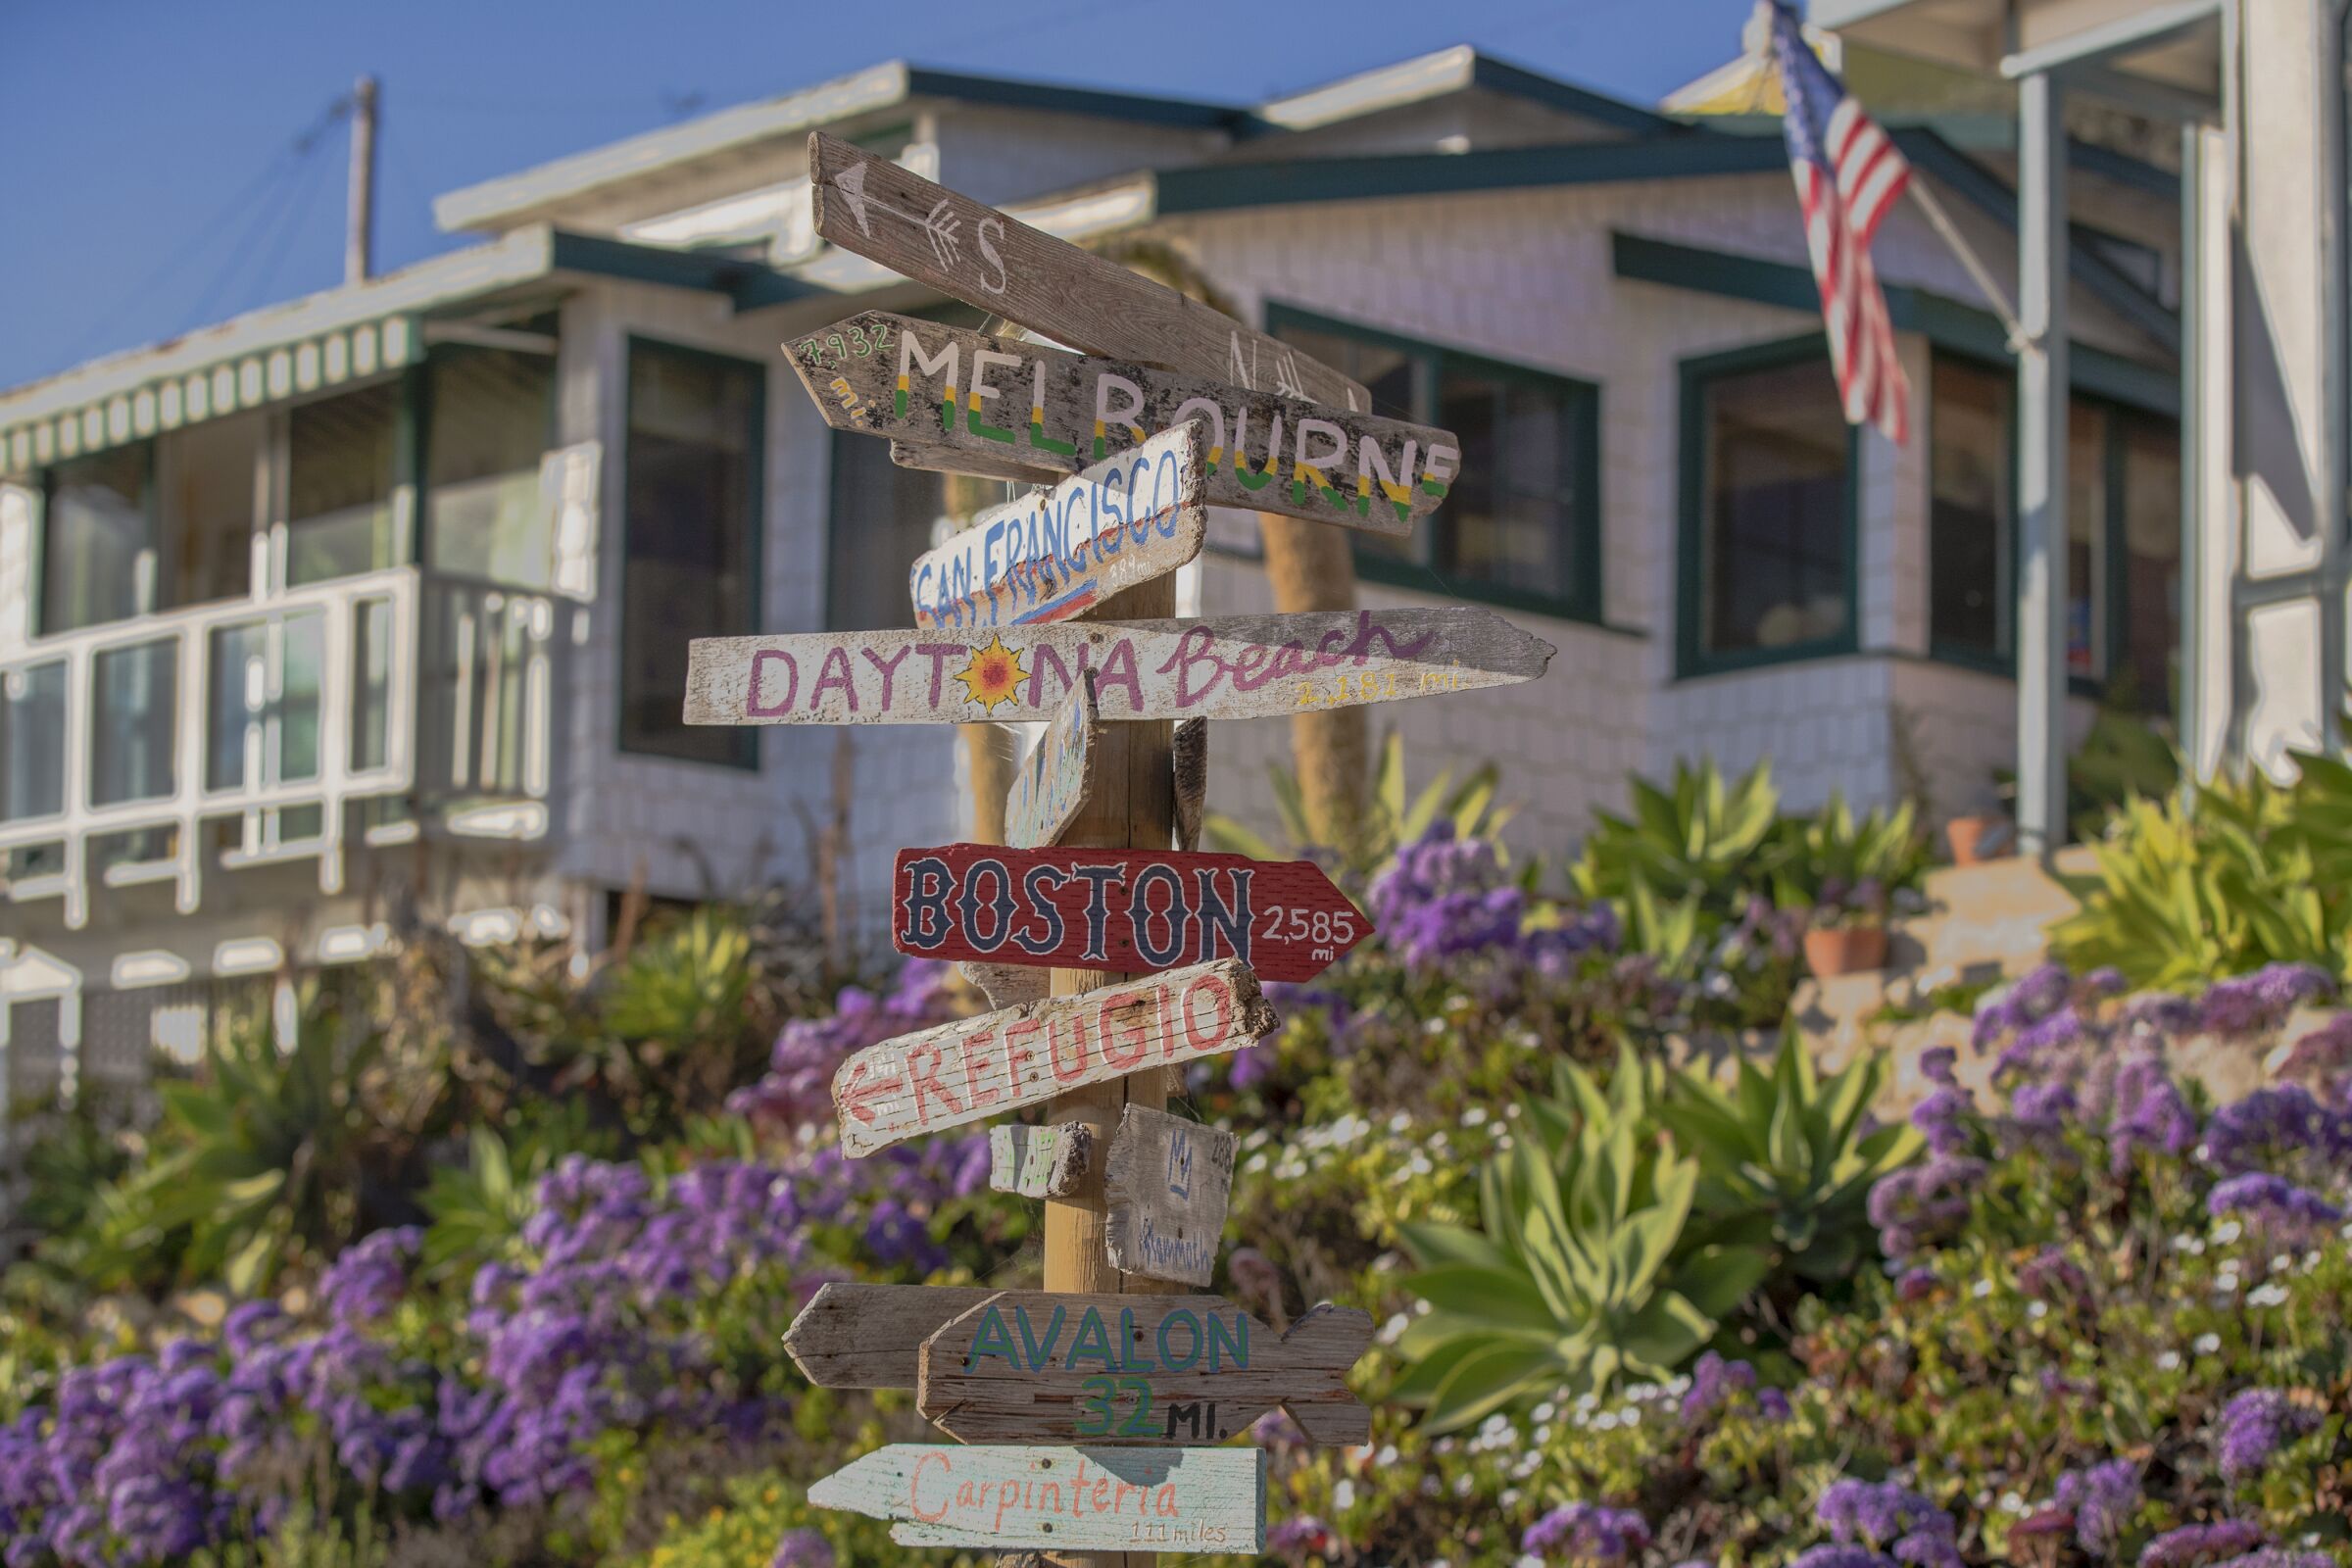 A beachside cottage with a signpost pointing in several different directions.